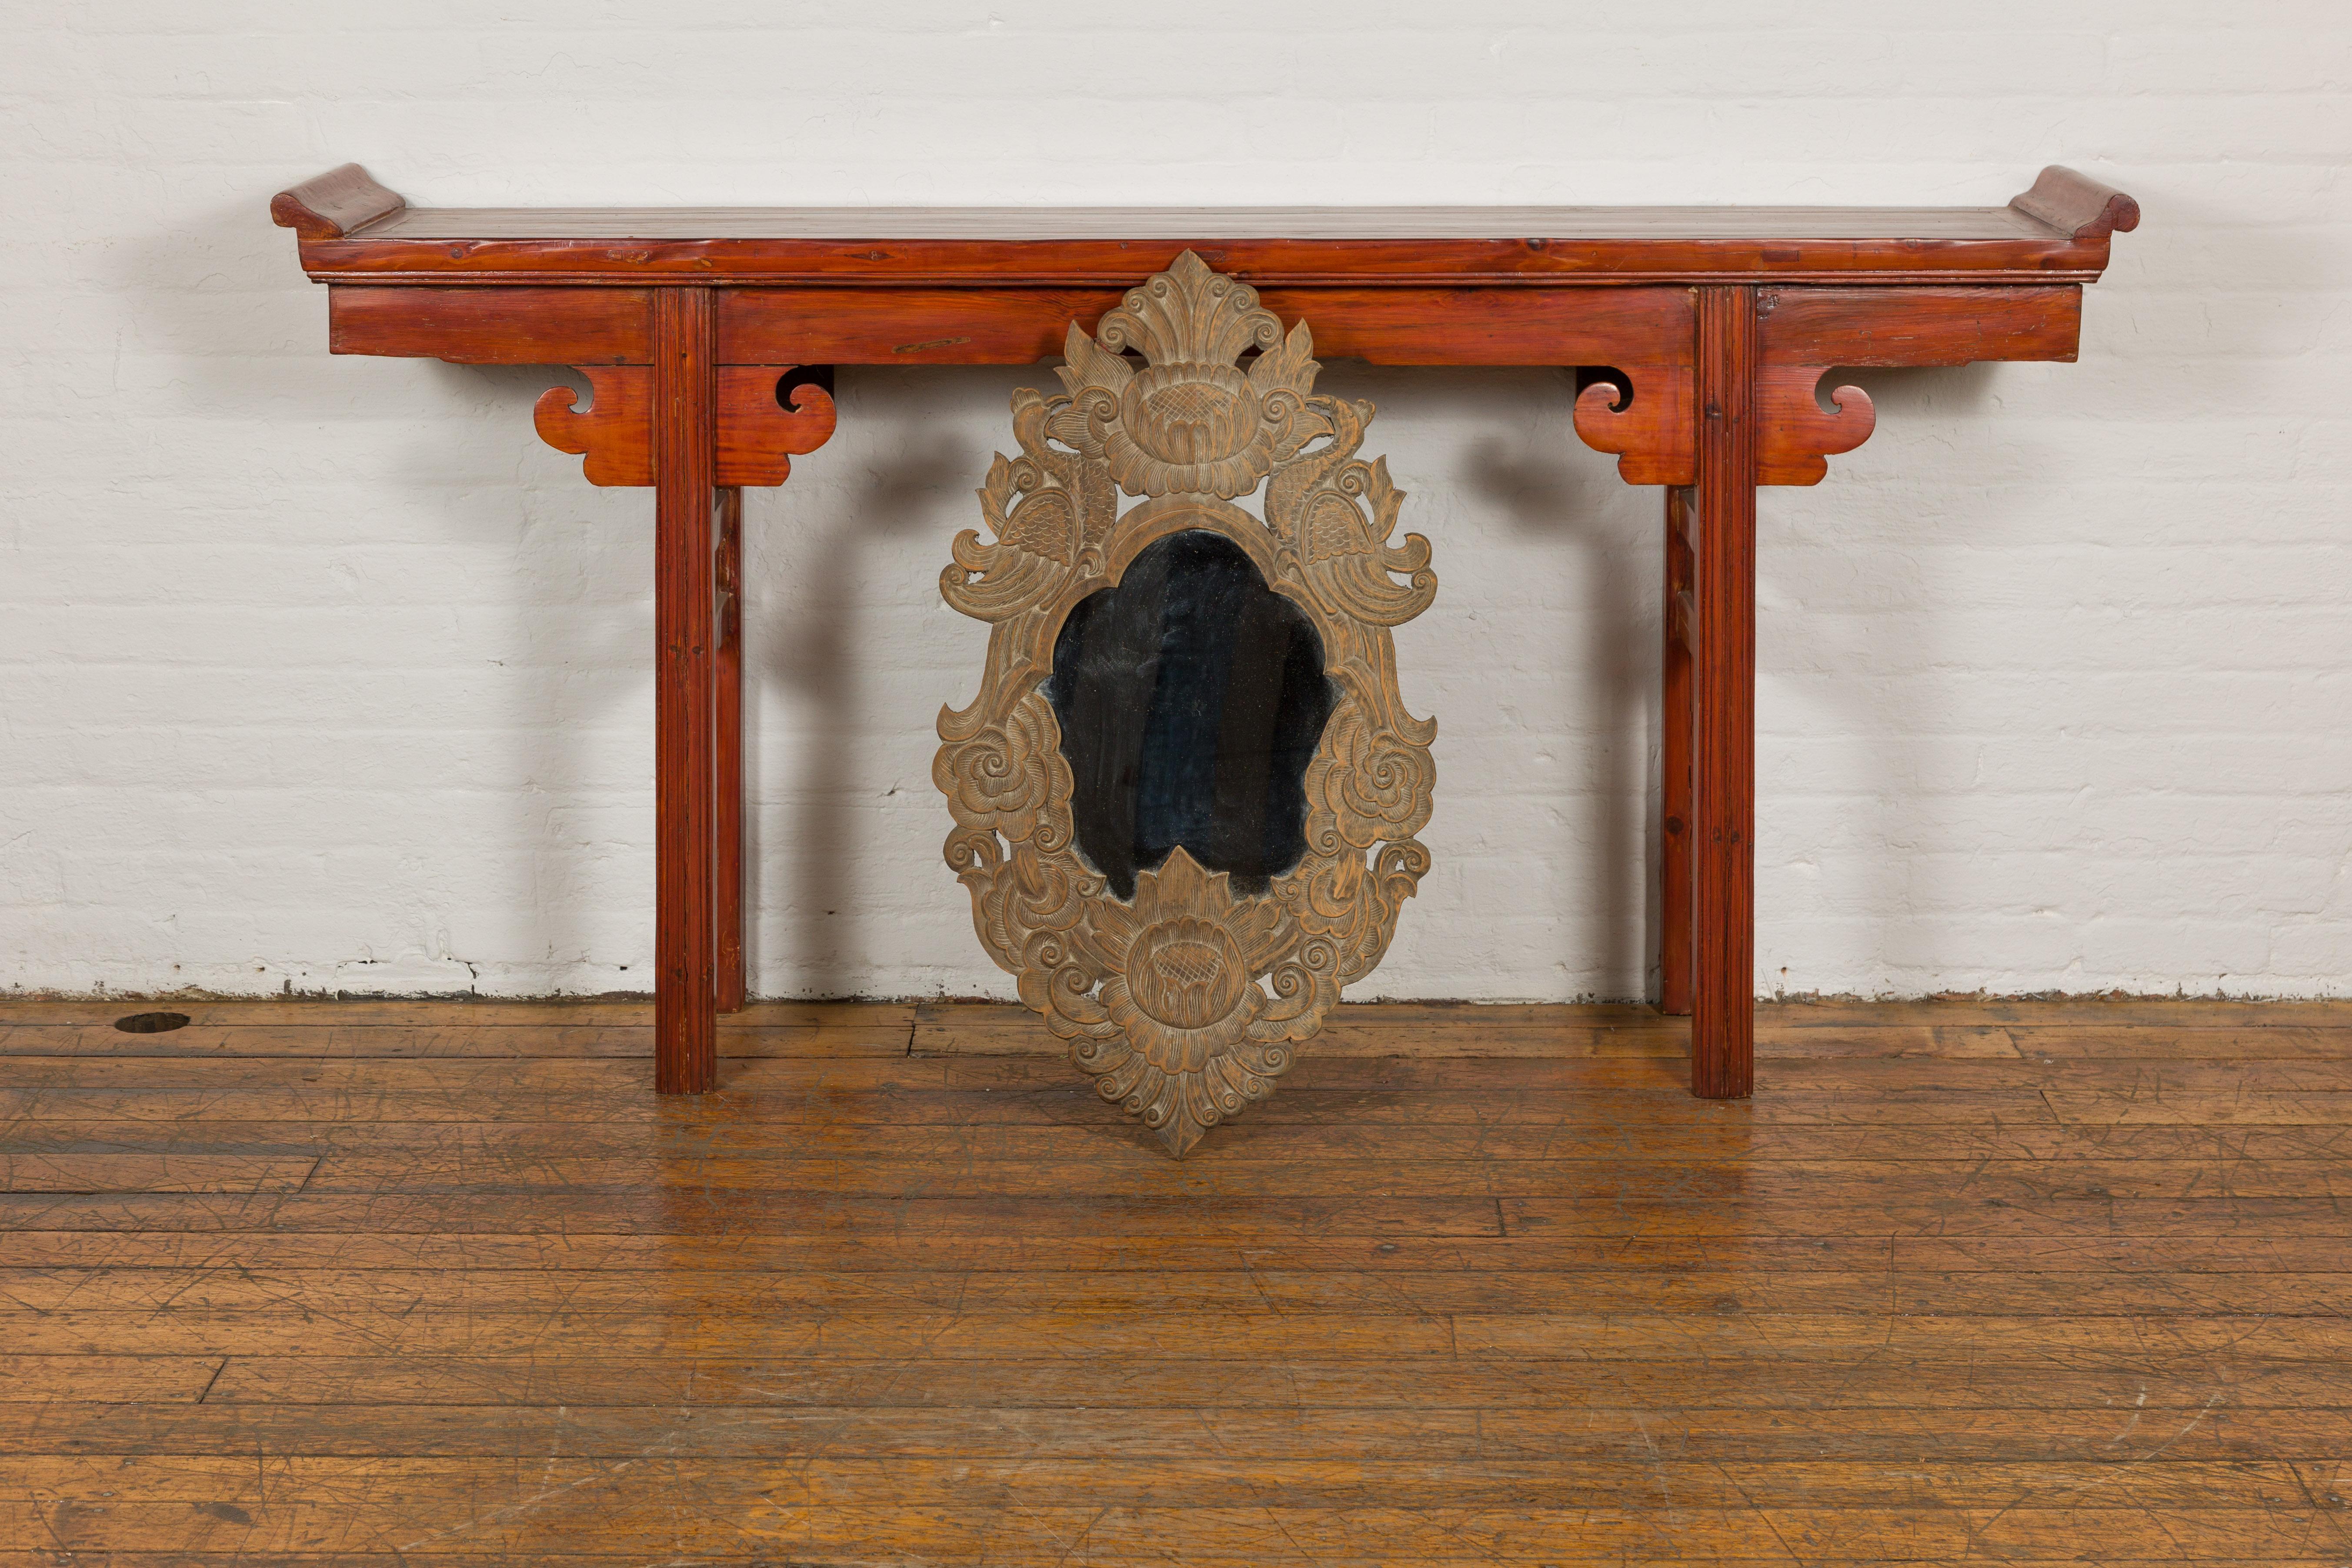 Thai wooden mirror from the mid 20th century with richly carved foliage, birds and flower décor. Emanating a sense of timeless elegance and undeniable artistry, this mid 20th century Thai wooden mirror is a wonderful example of traditional Thai